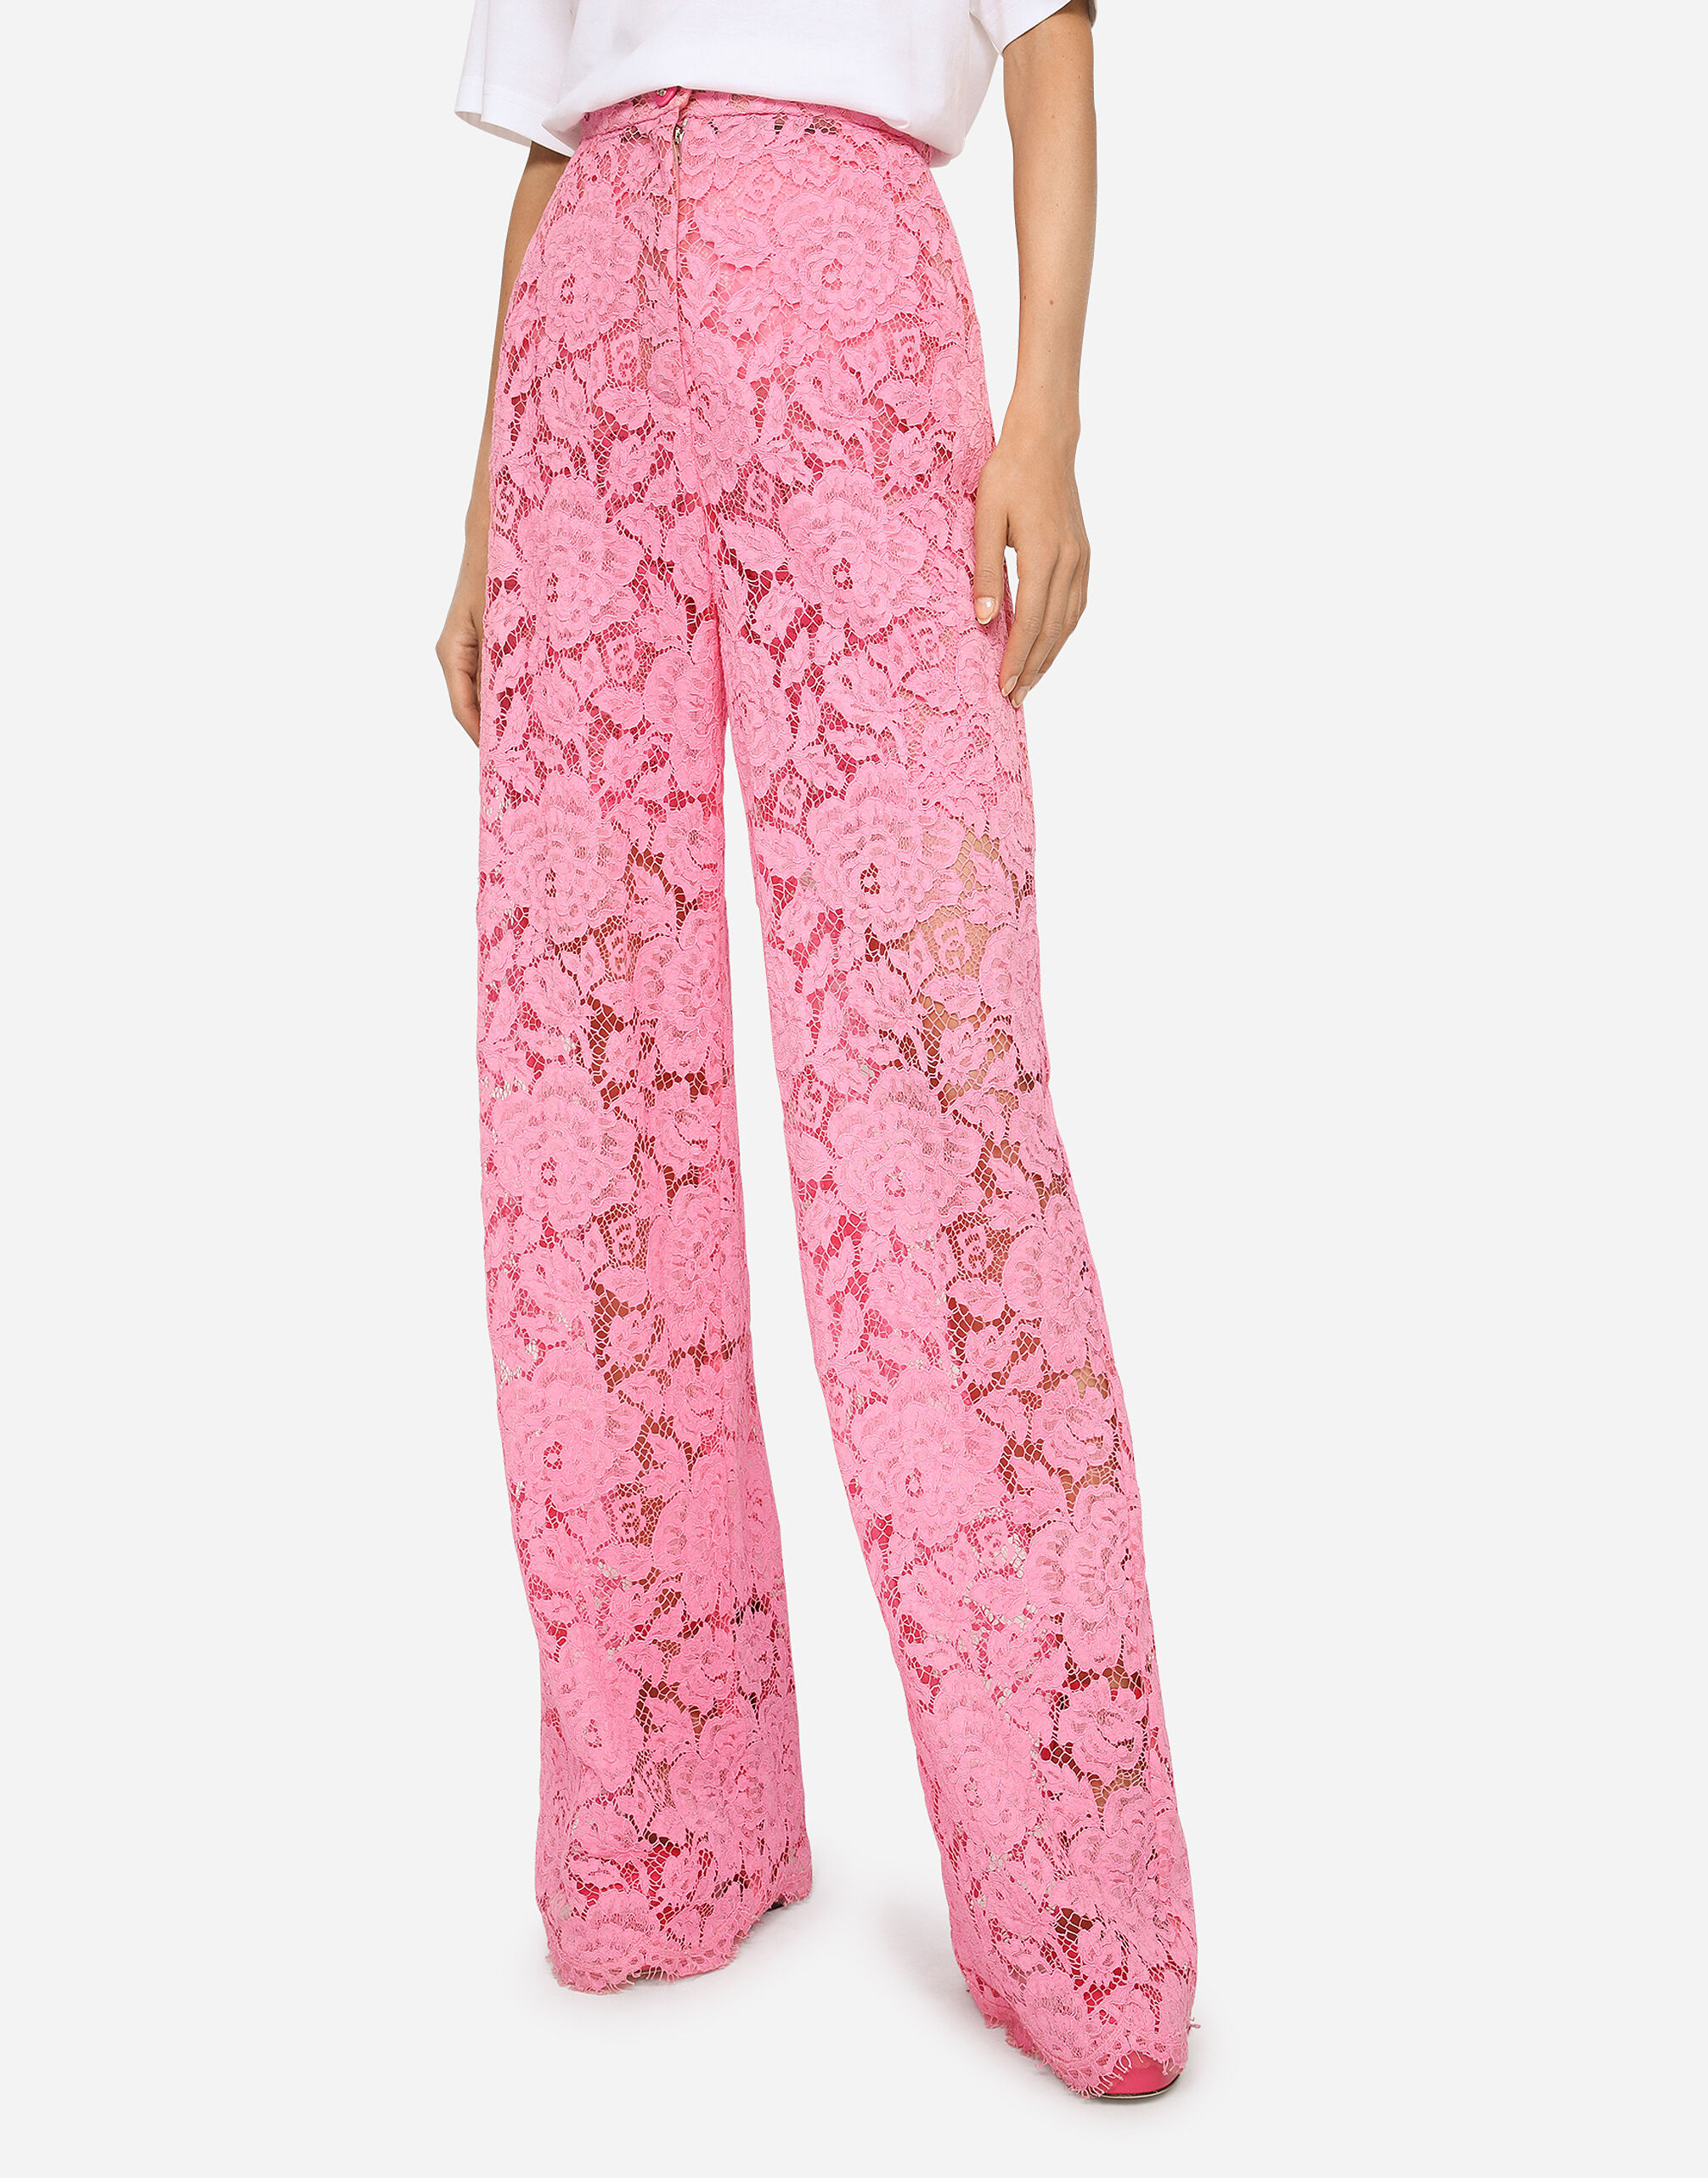 Flared branded stretch lace pants